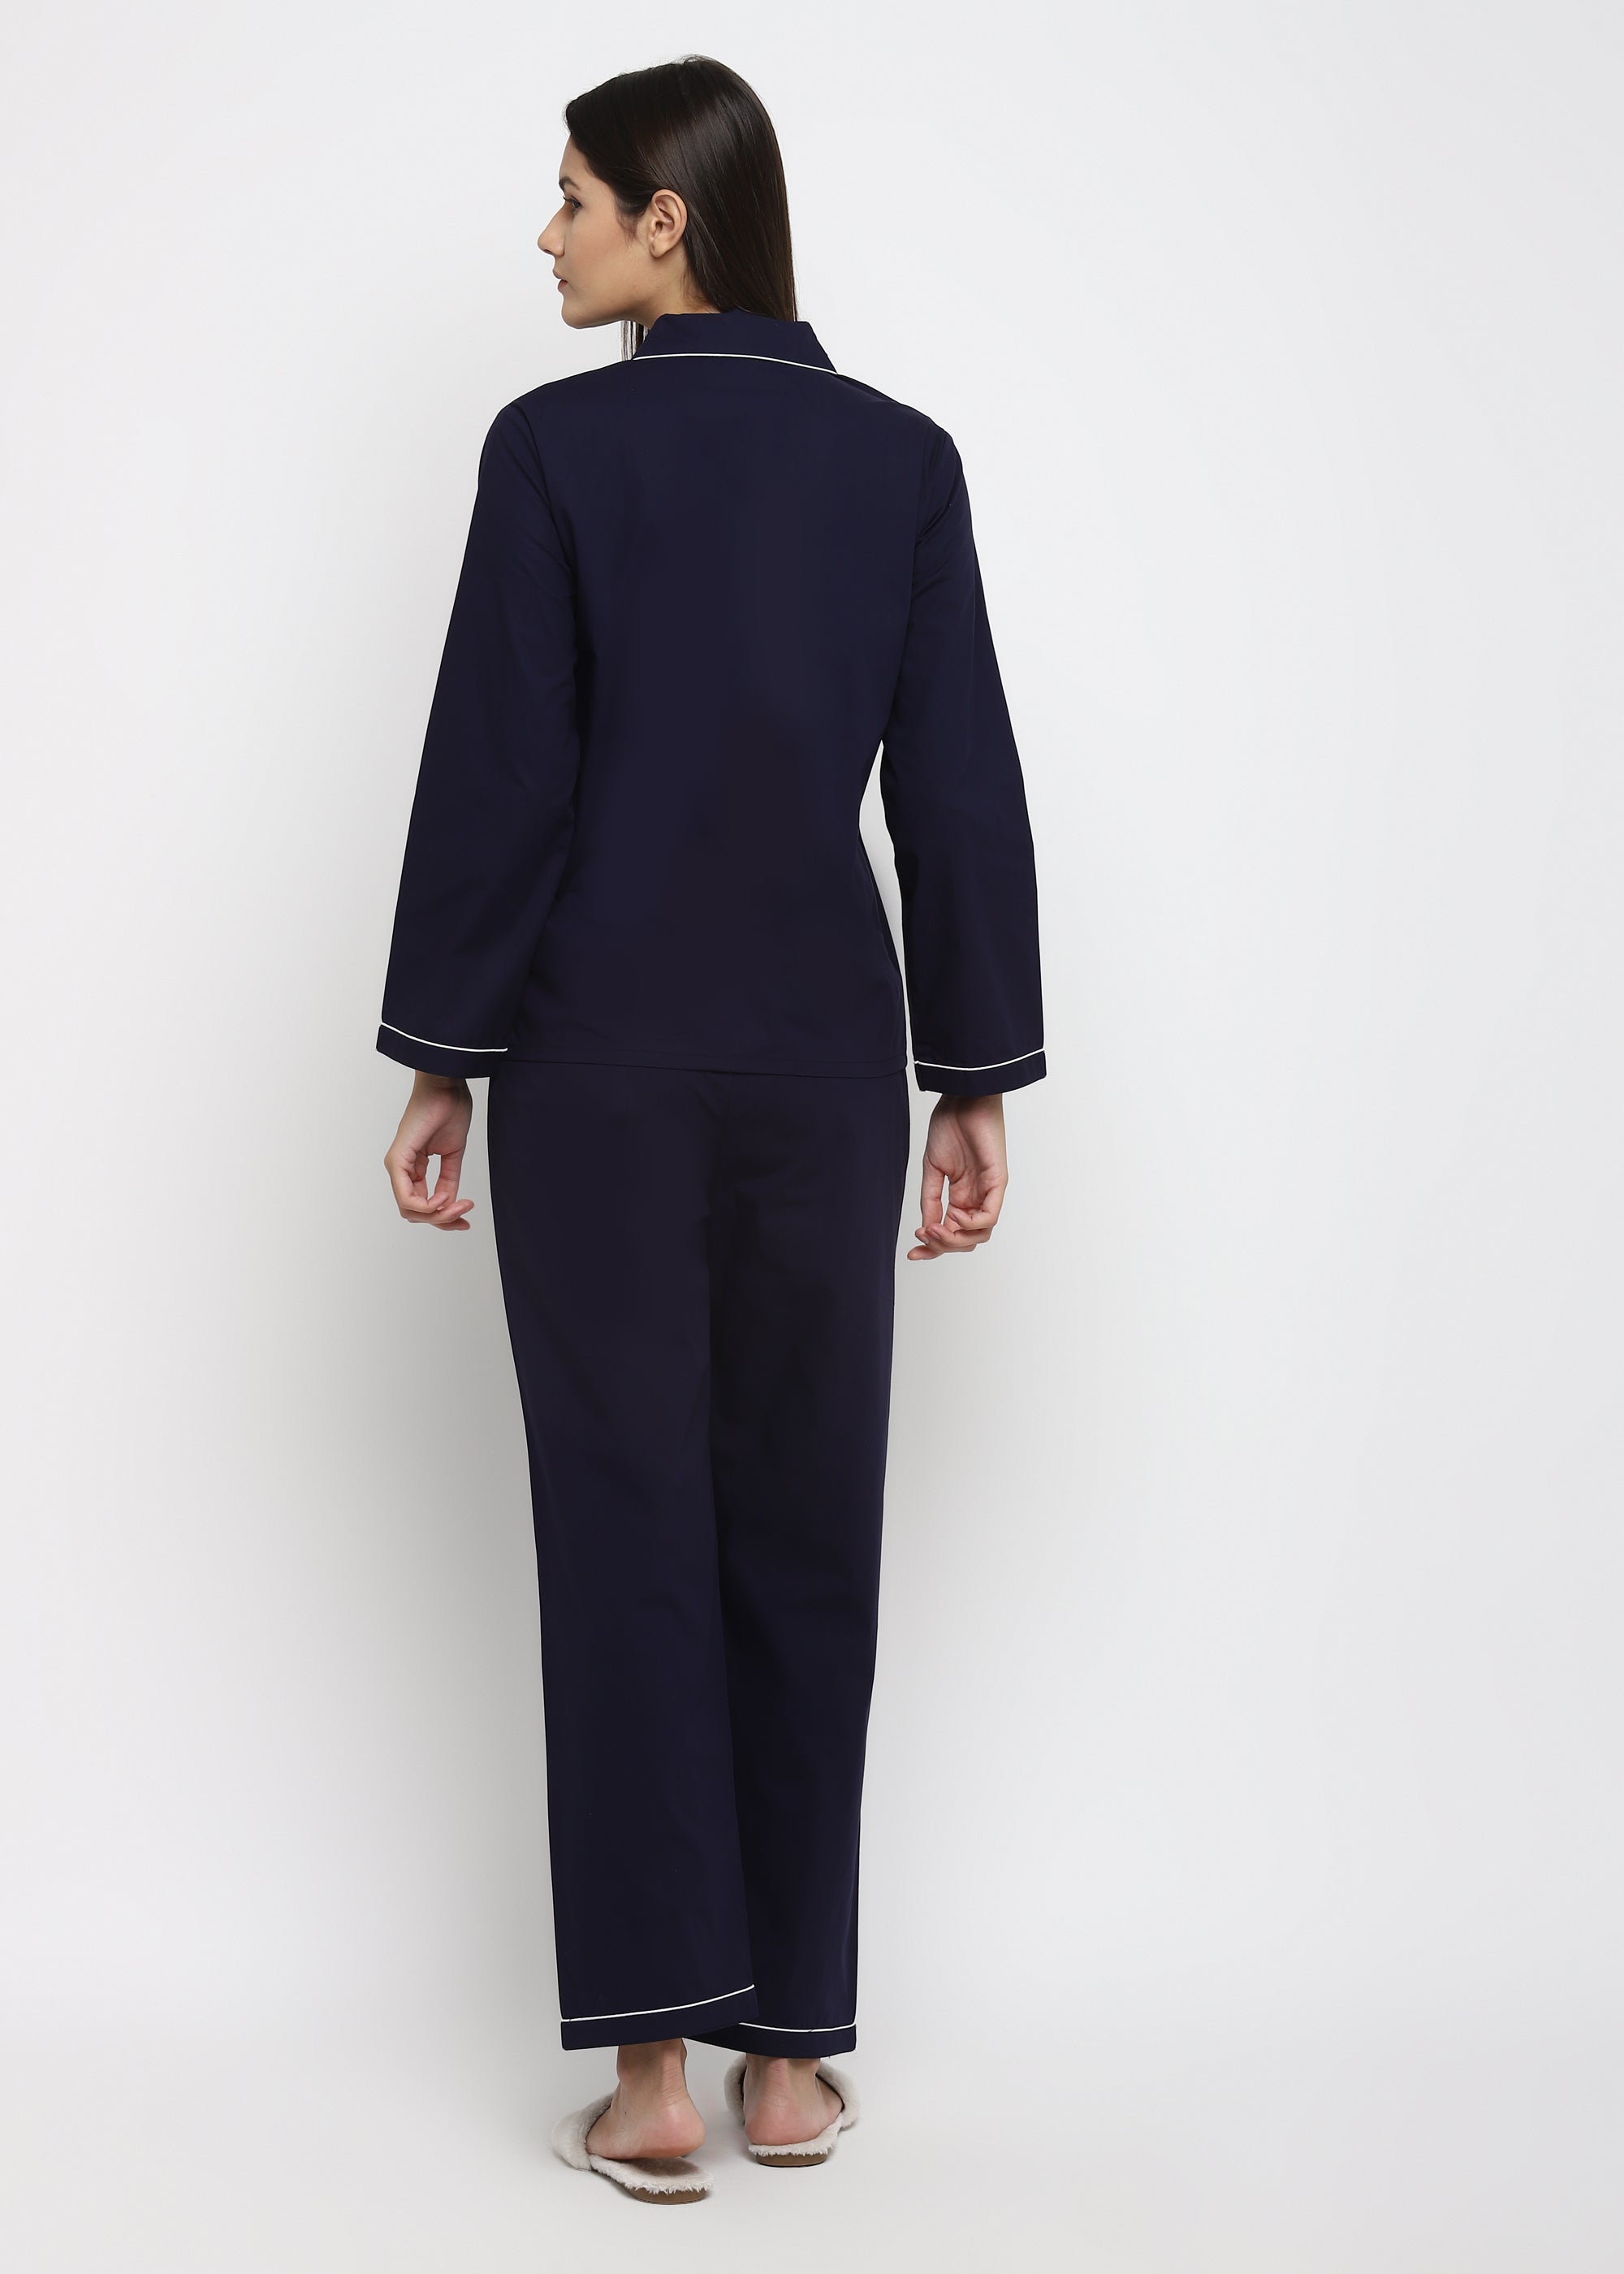 Navy Cotton with White Piping Women's Night Suit - Shopbloom